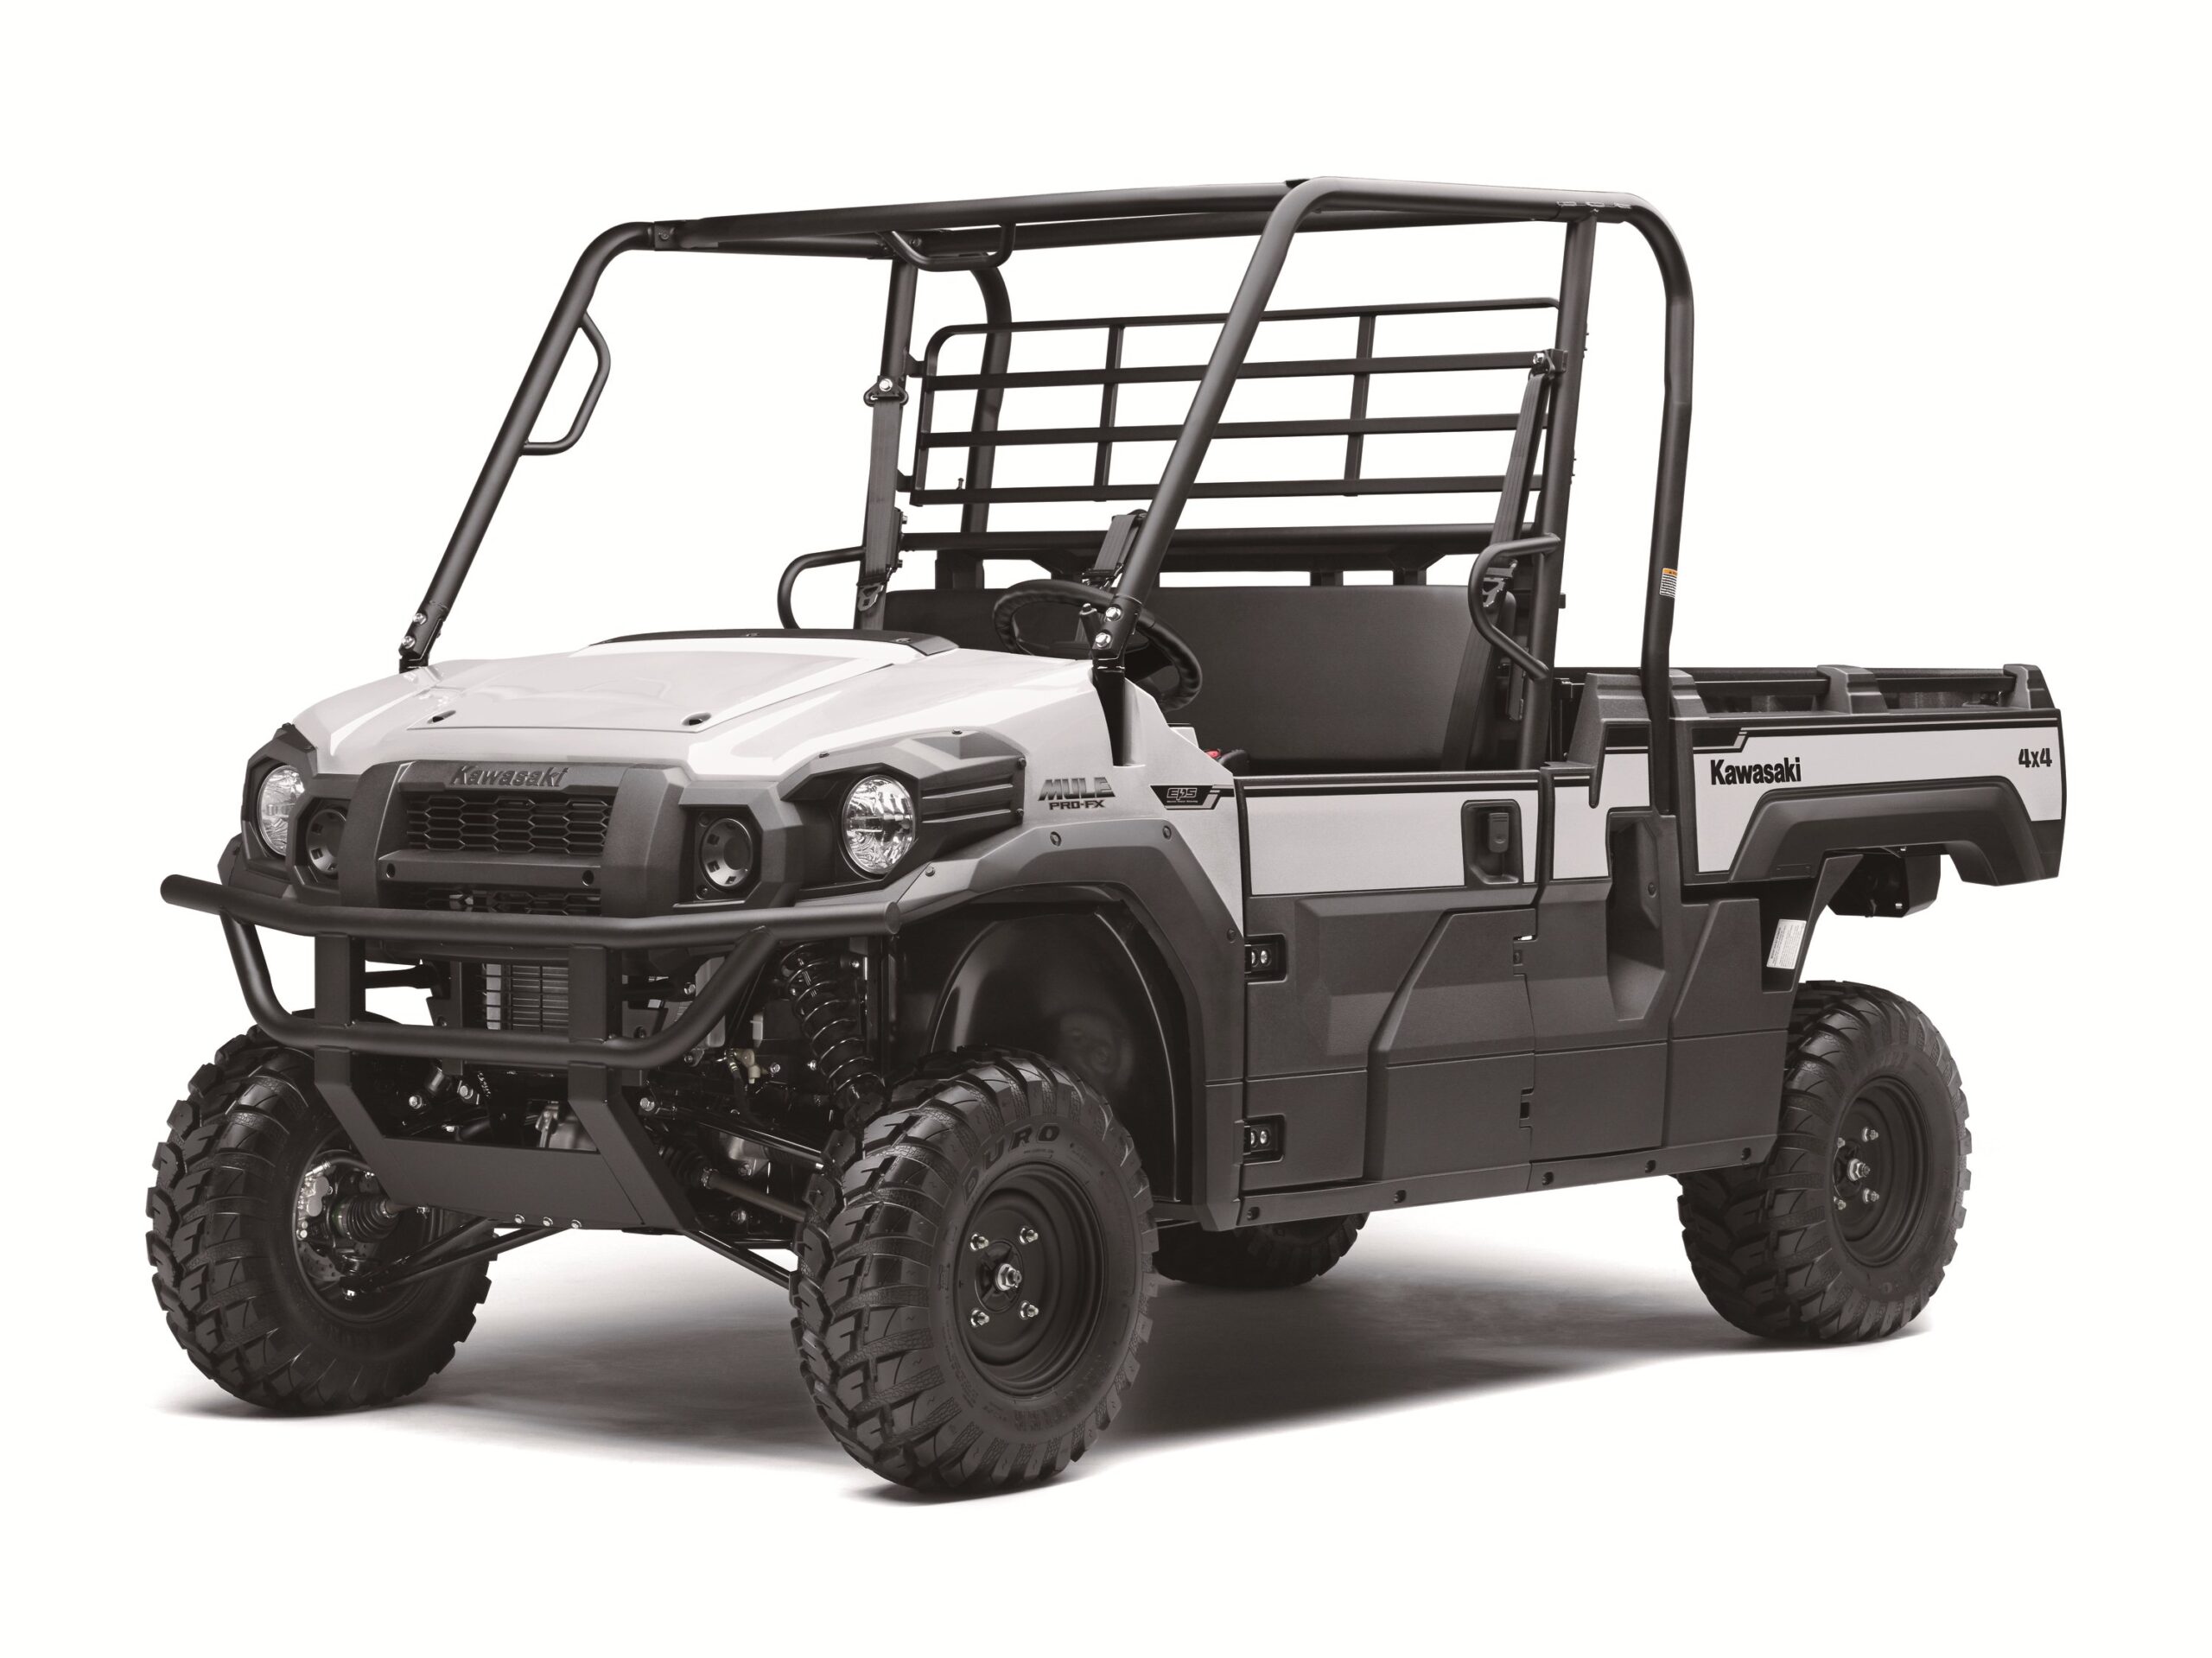 NEW MODELS 2023 Kawasaki Mule™ Family Features a Full Lineup of